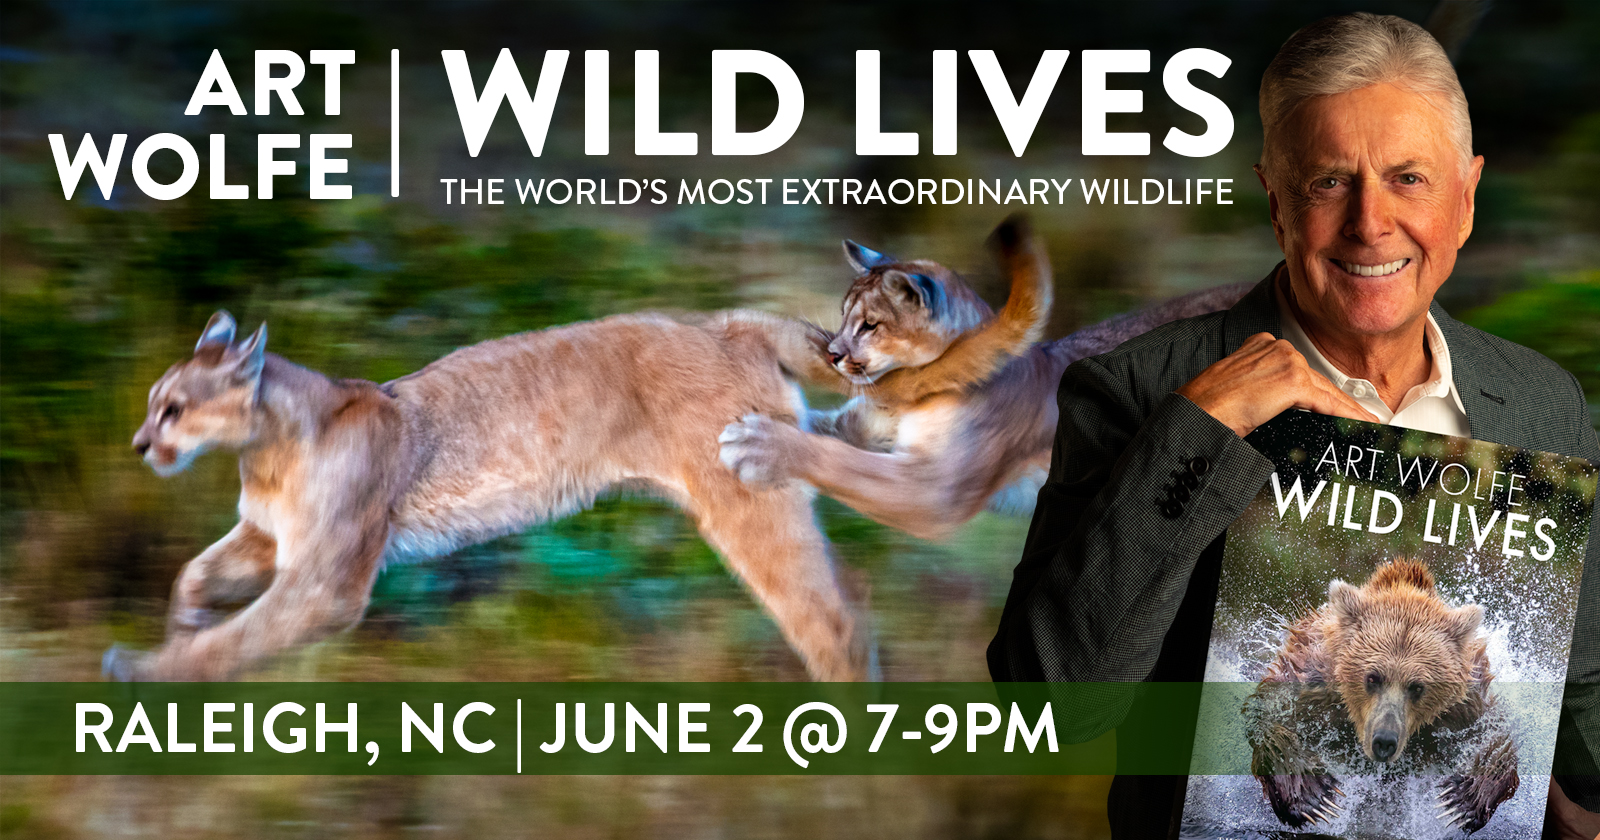 Art Wolfe Presents WILD LIVES in Raleigh, NC on June 2nd at 7PM